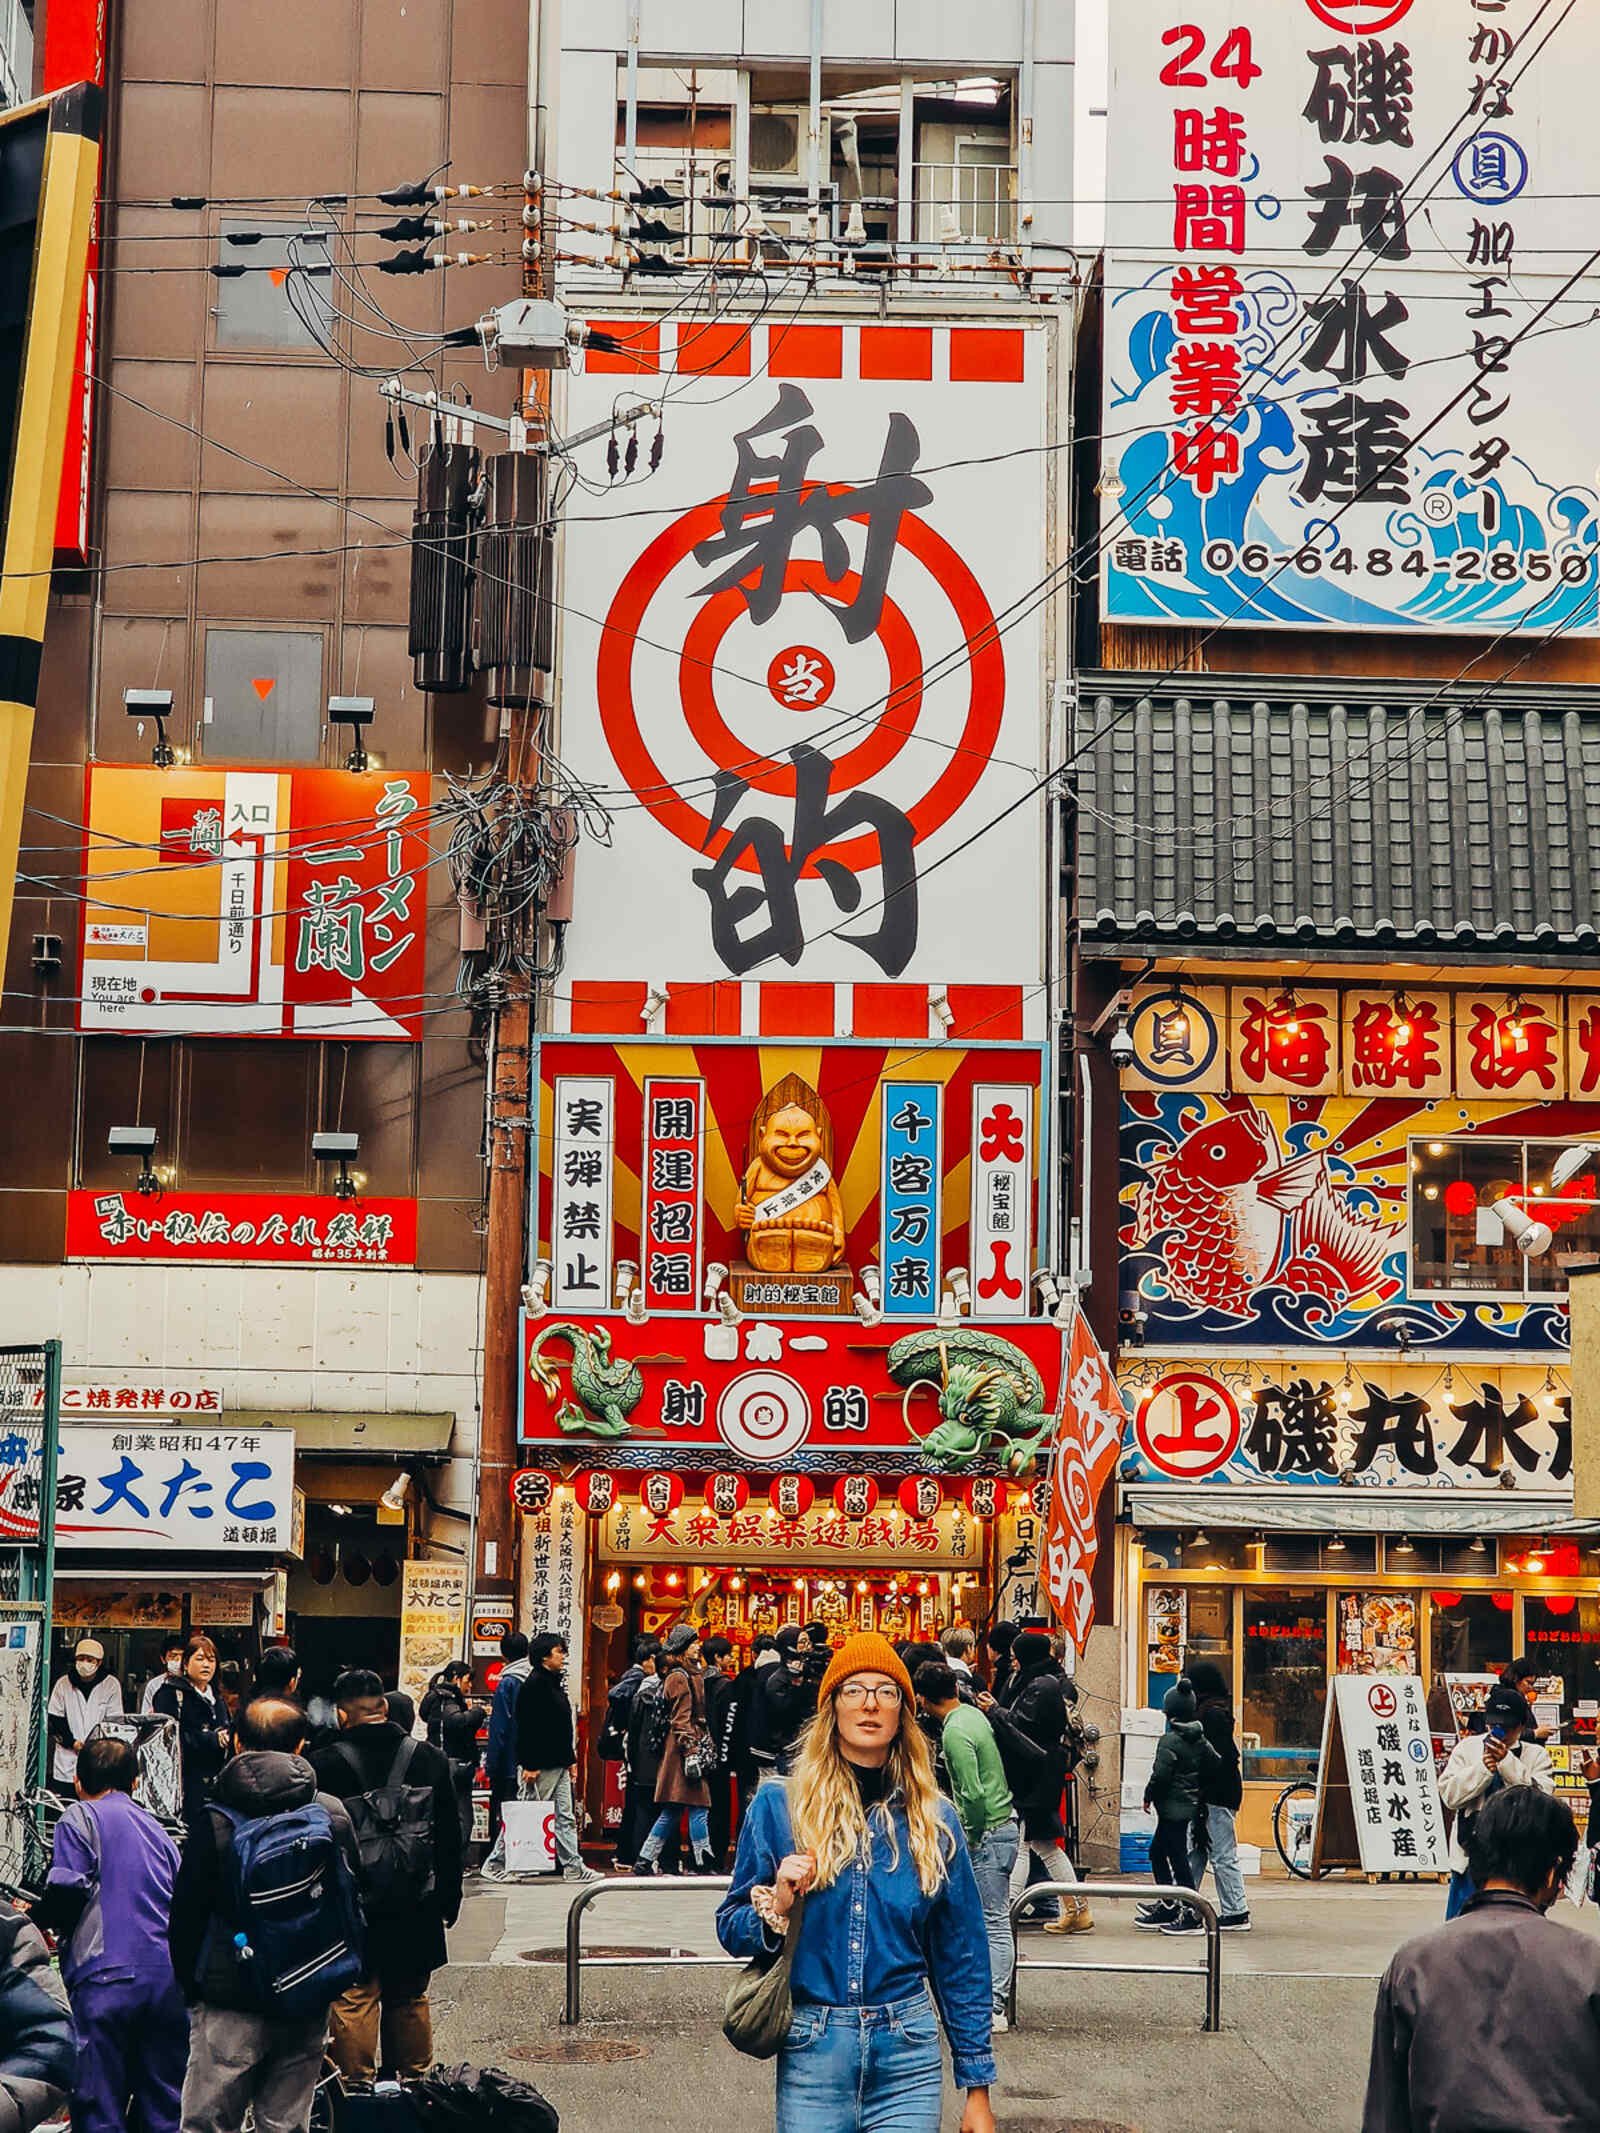 Helena in a blue denim shirt and jeans walking down a colourful street covered in bright signage, shop fronts, lanterns, in yellow and red with black Japanese writing in Osaka's Dotonbori district